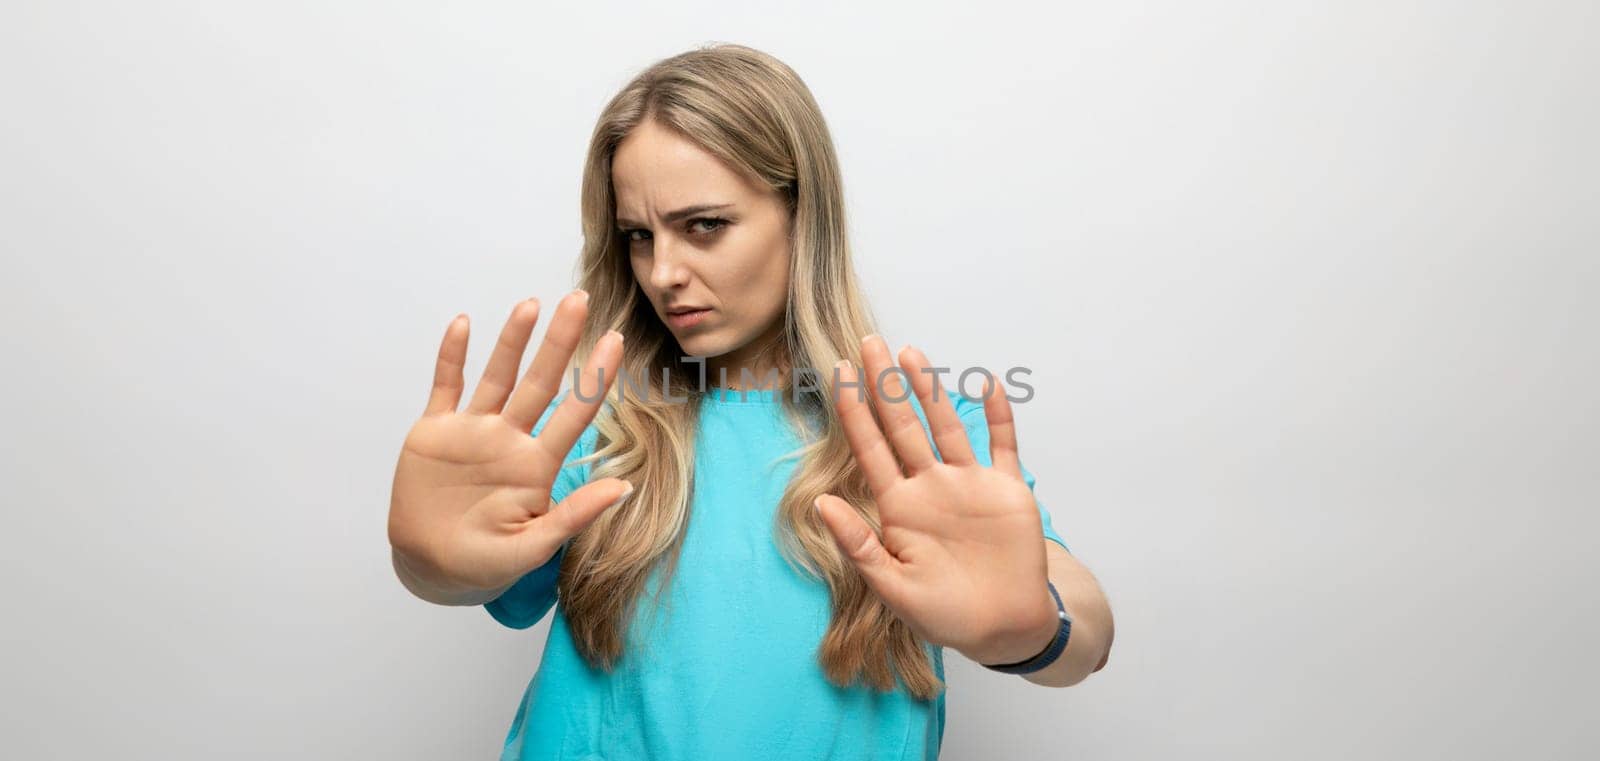 european girl waving her hands on a white background.